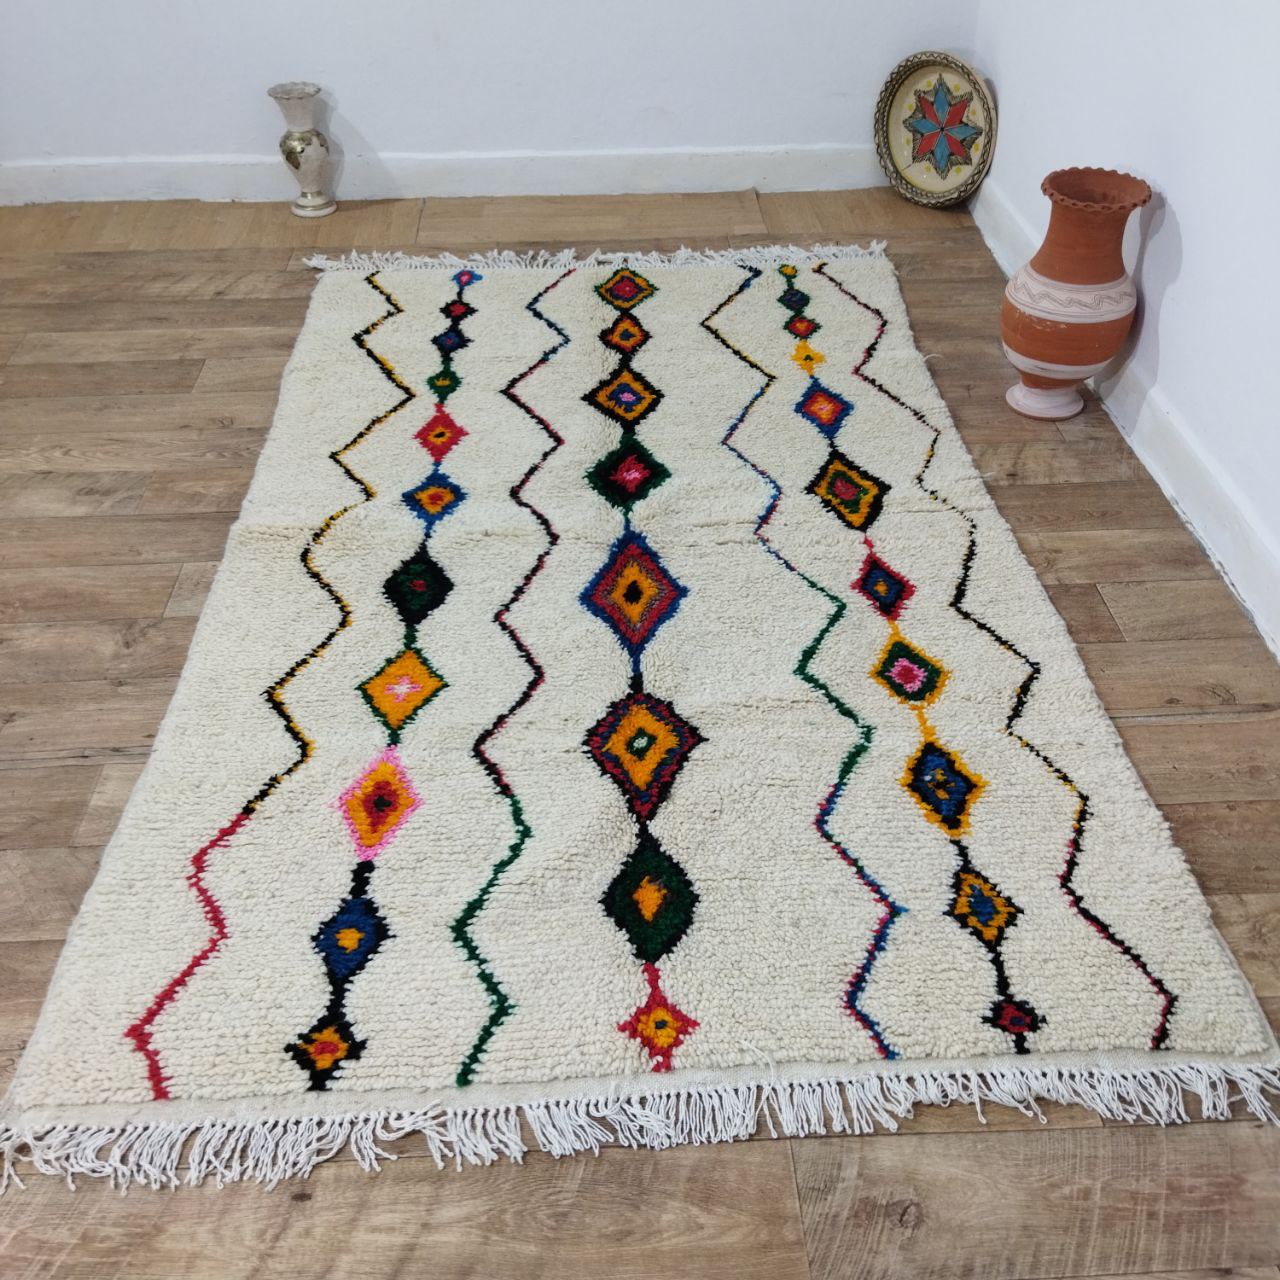 Authentic Moroccan Azilal Berber Rugs - Timeless Traditional Beauty in Multicolor